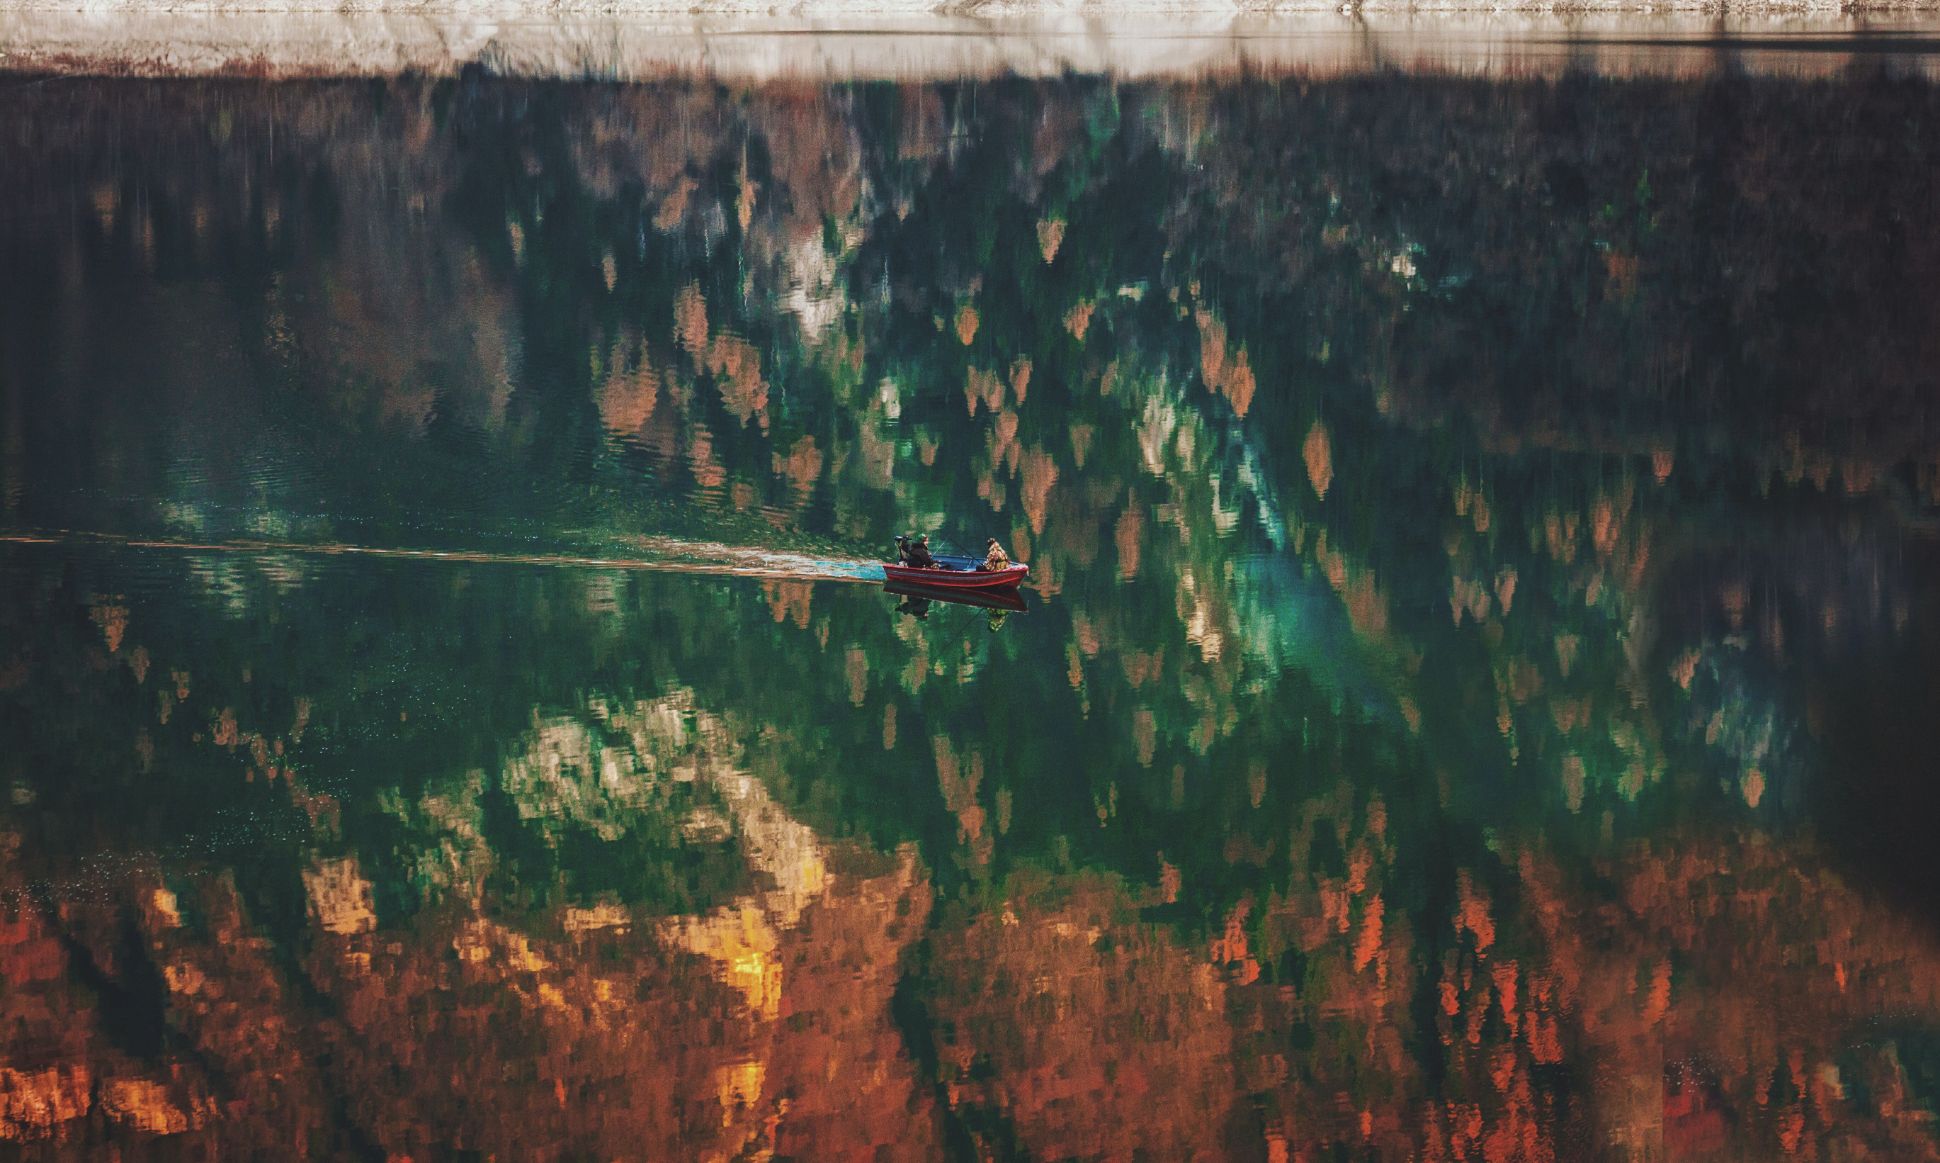 Two people in a small boat moving across water with reflection of autumn trees.